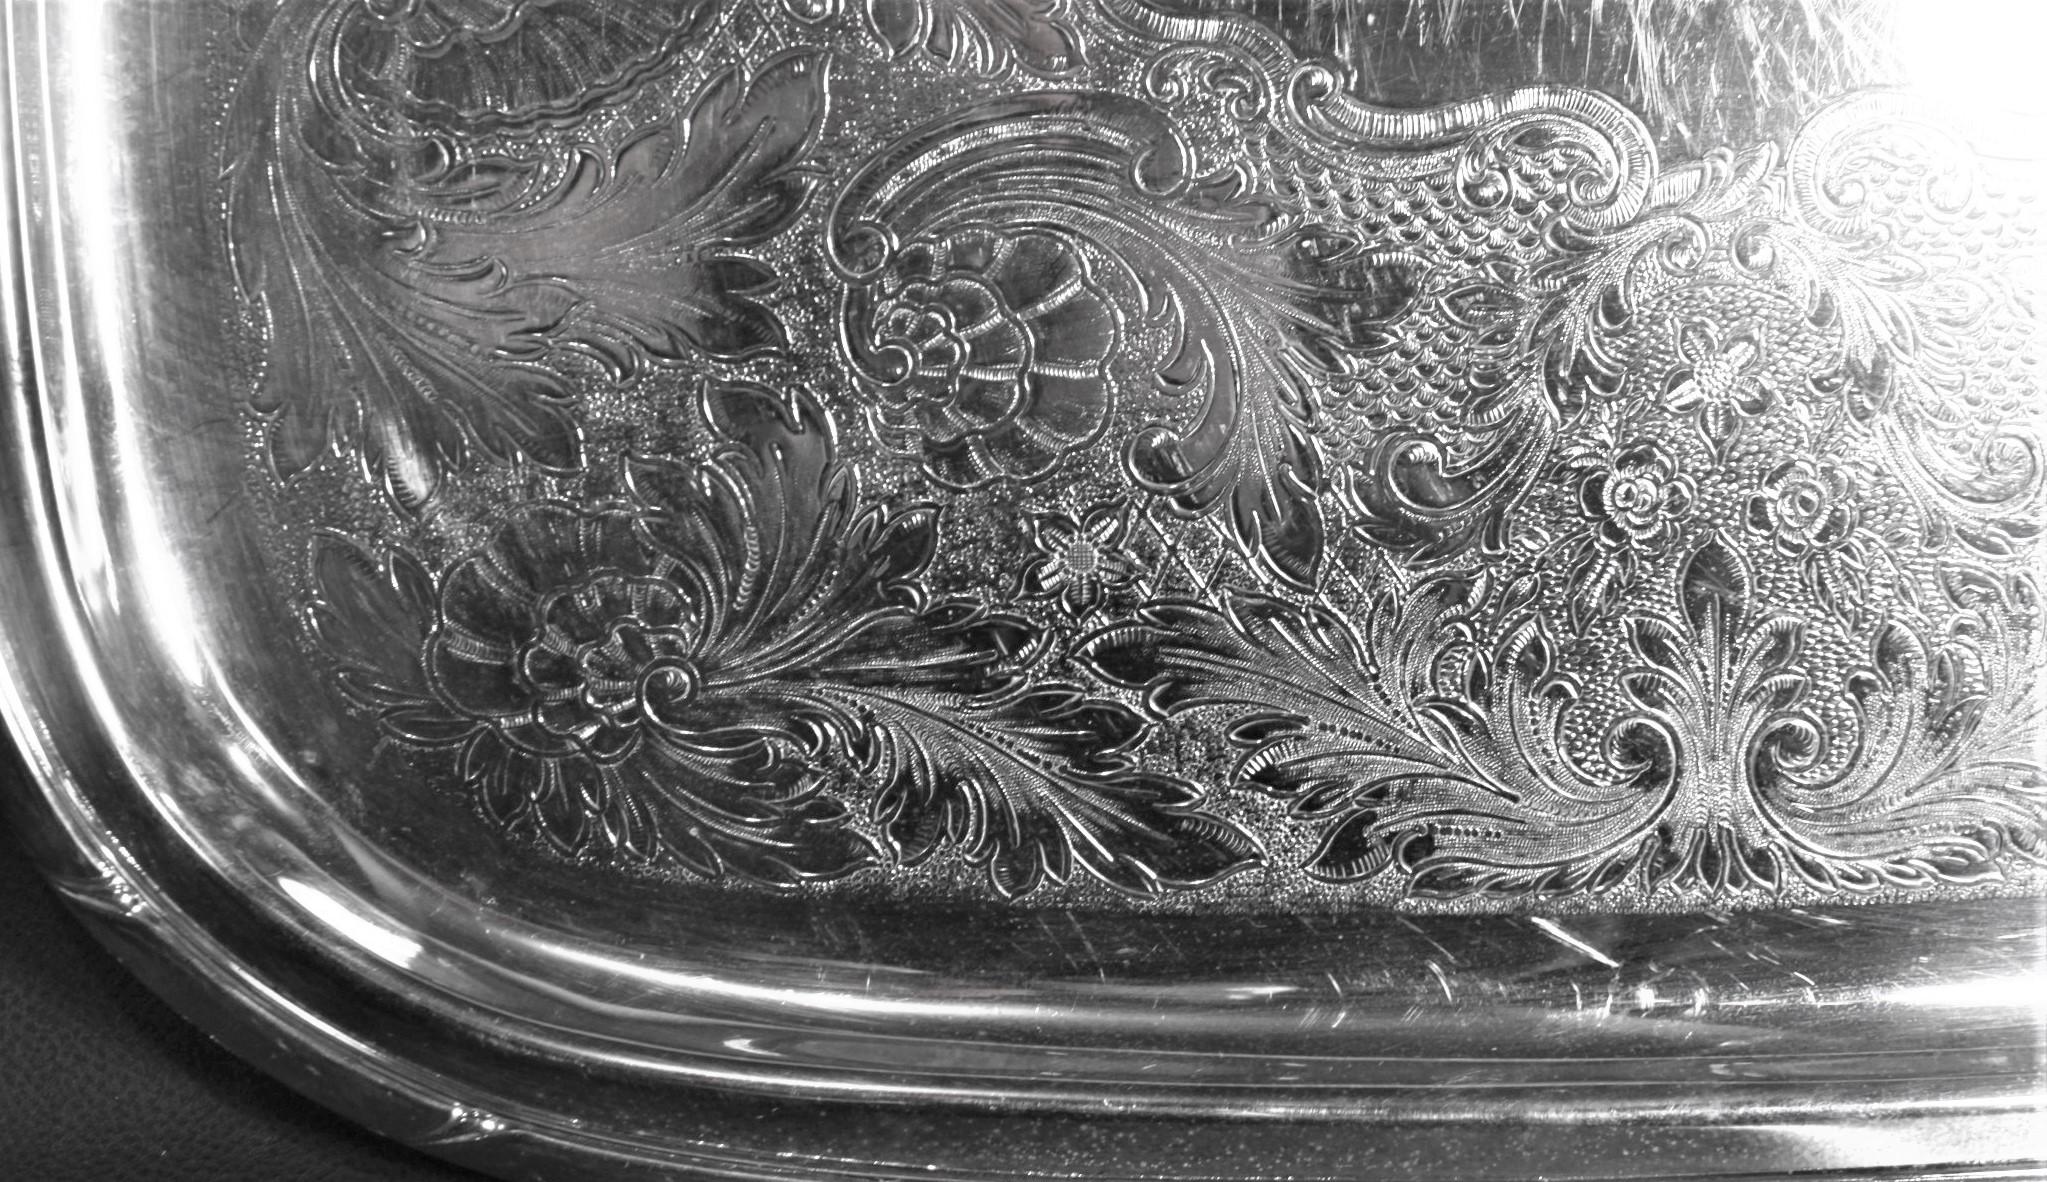 Copper Rogers Antique Styled Silver Plated Engraved Serving Tray For Sale